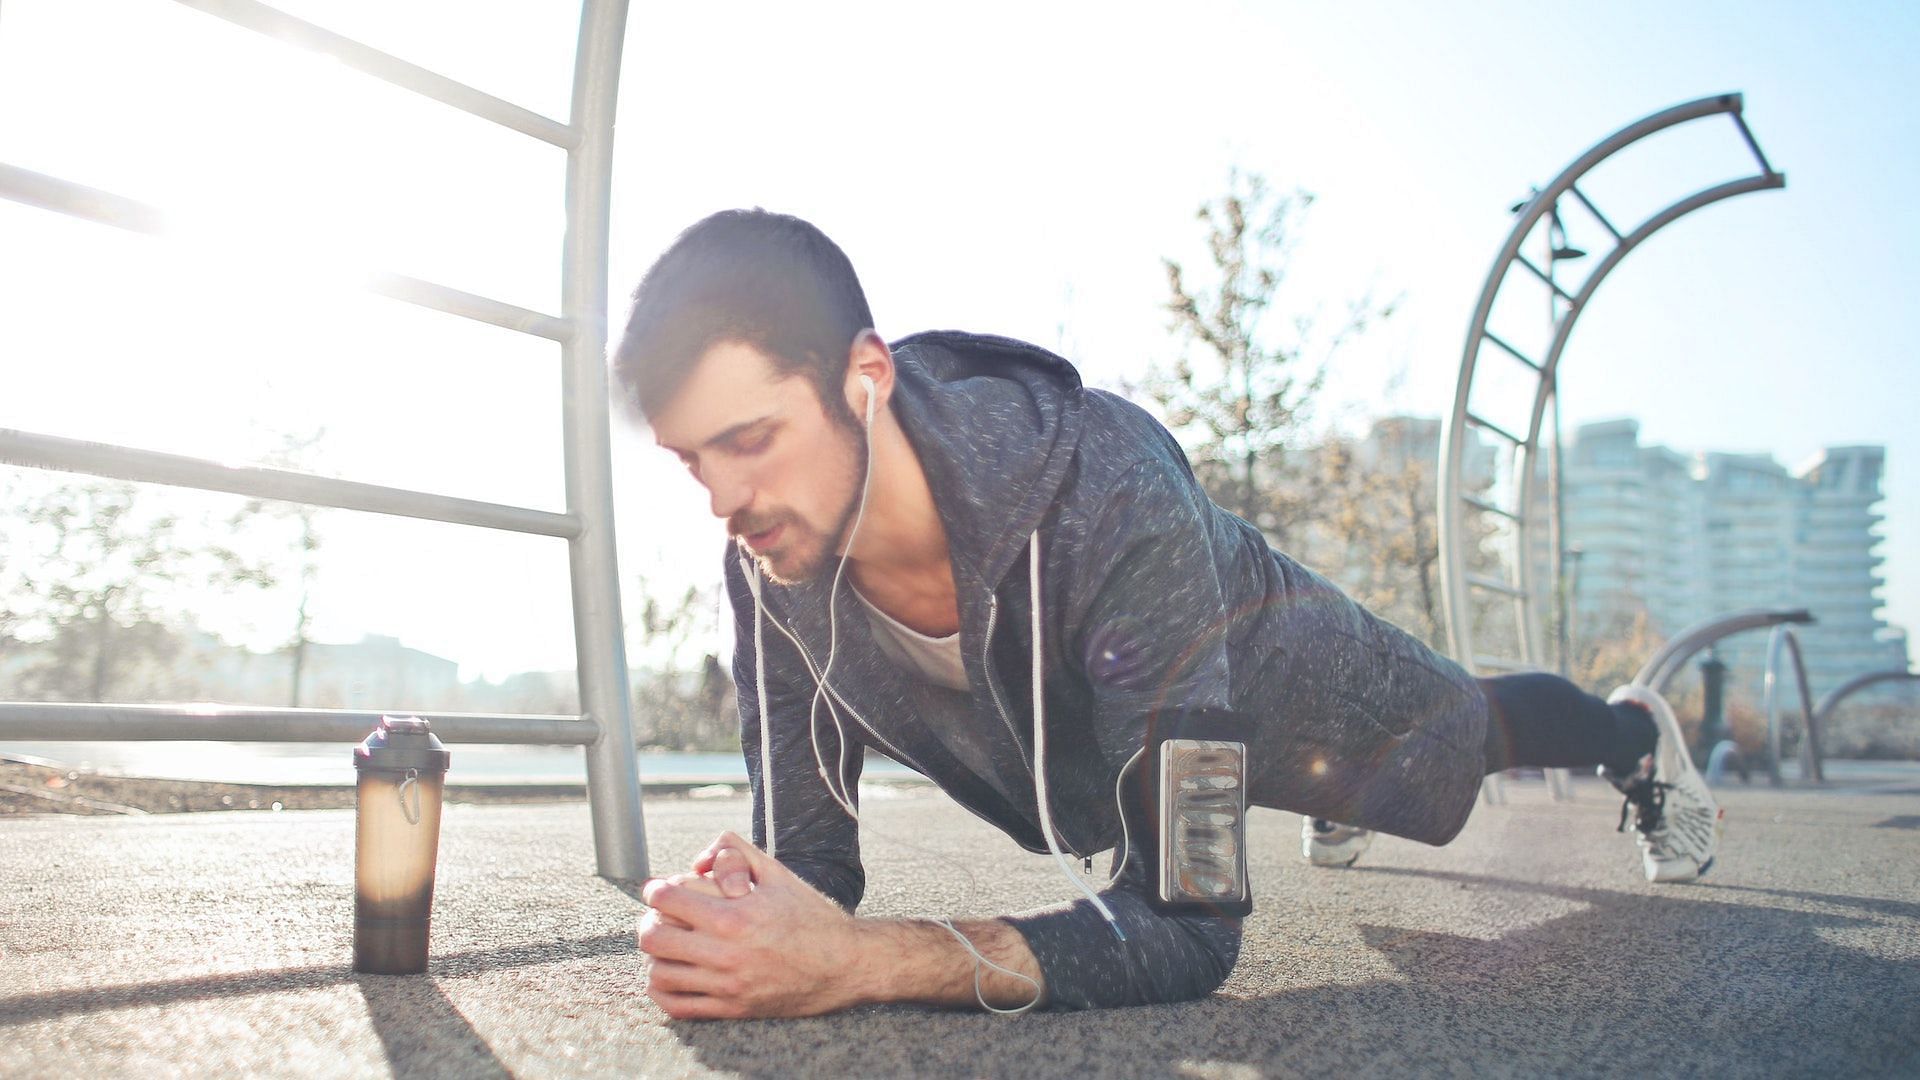 Afternoon workouts mean more sweat (Image via Pexels/Andrea Piacquadio)